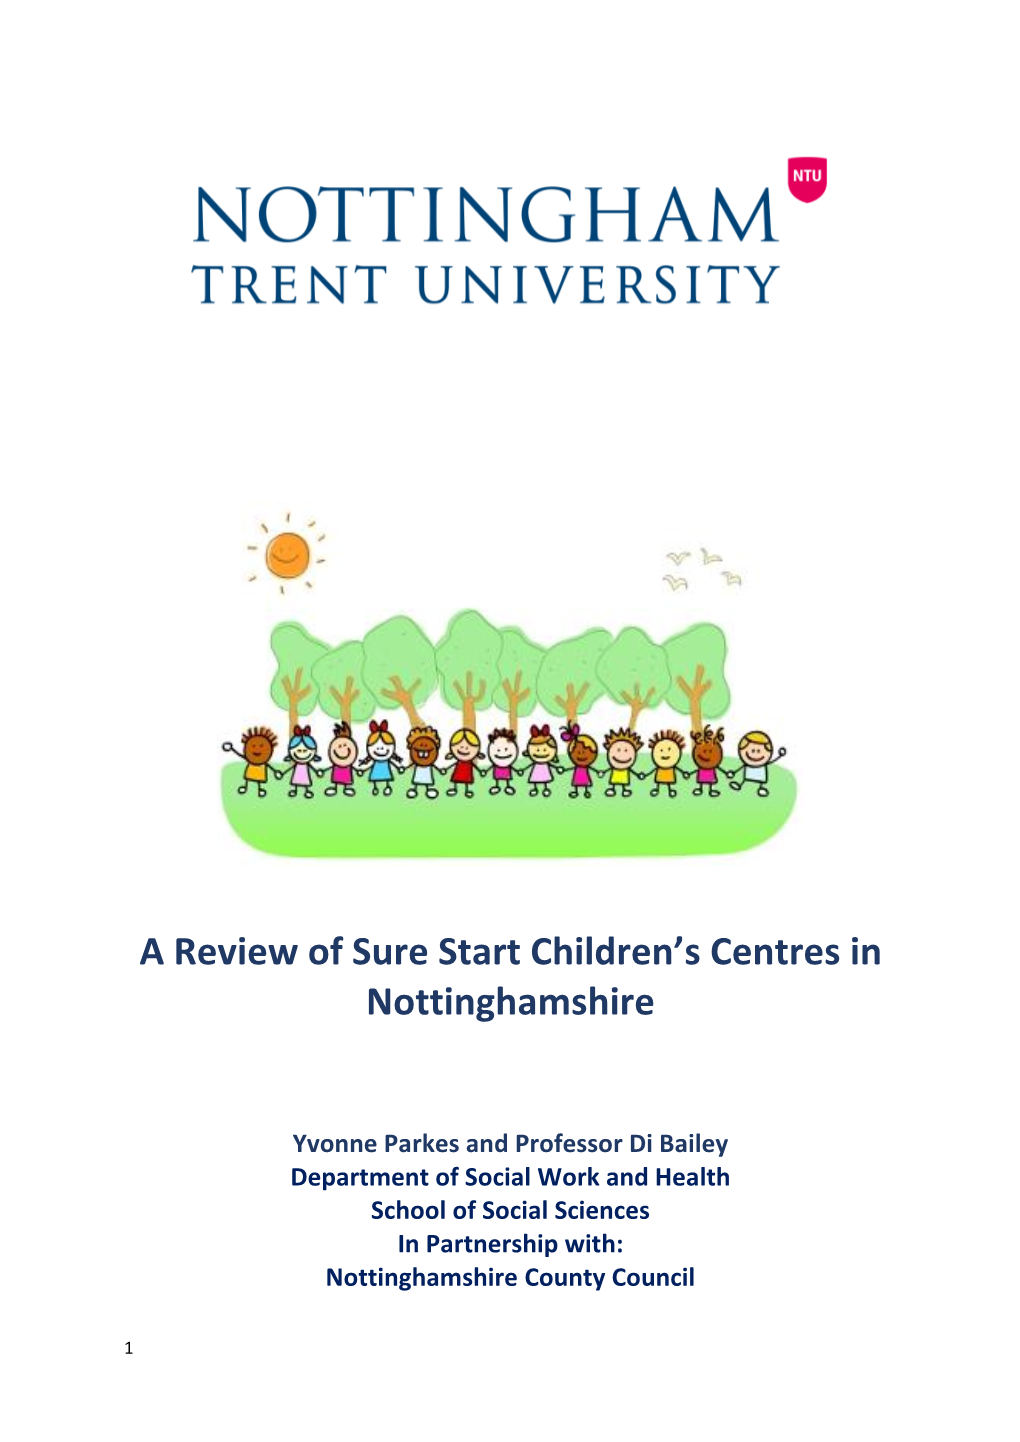 A Review of Sure Start Children's Centres in Nottinghamshire